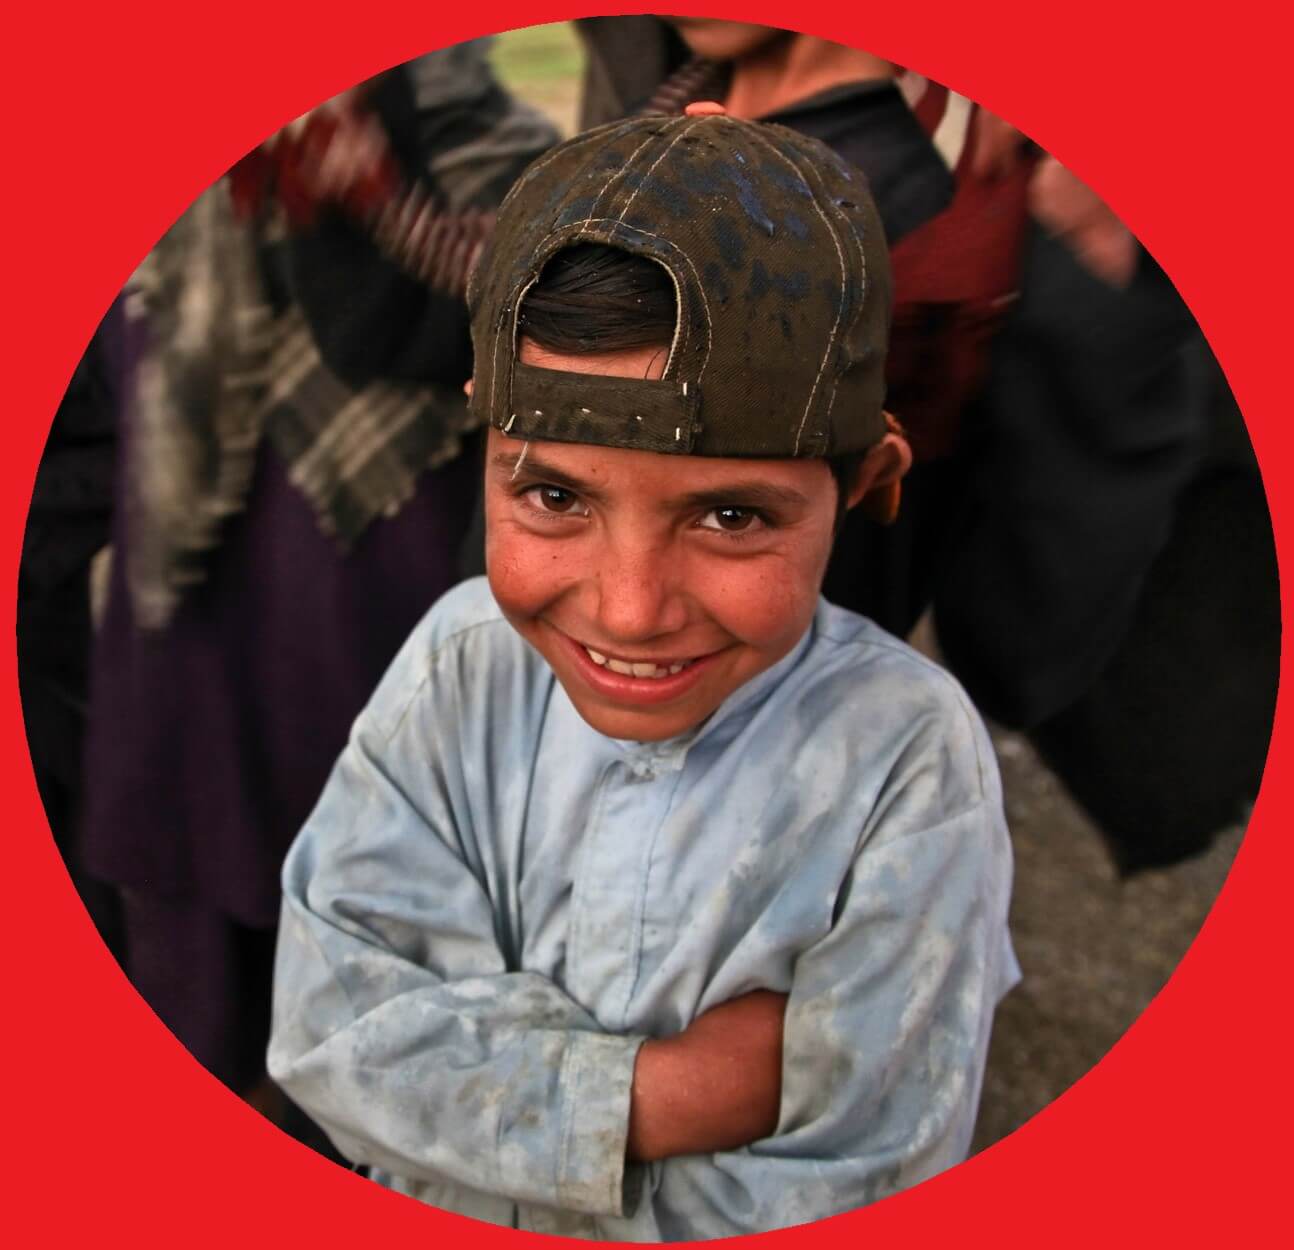 A hungry boy in Afghanistan desperately needs food